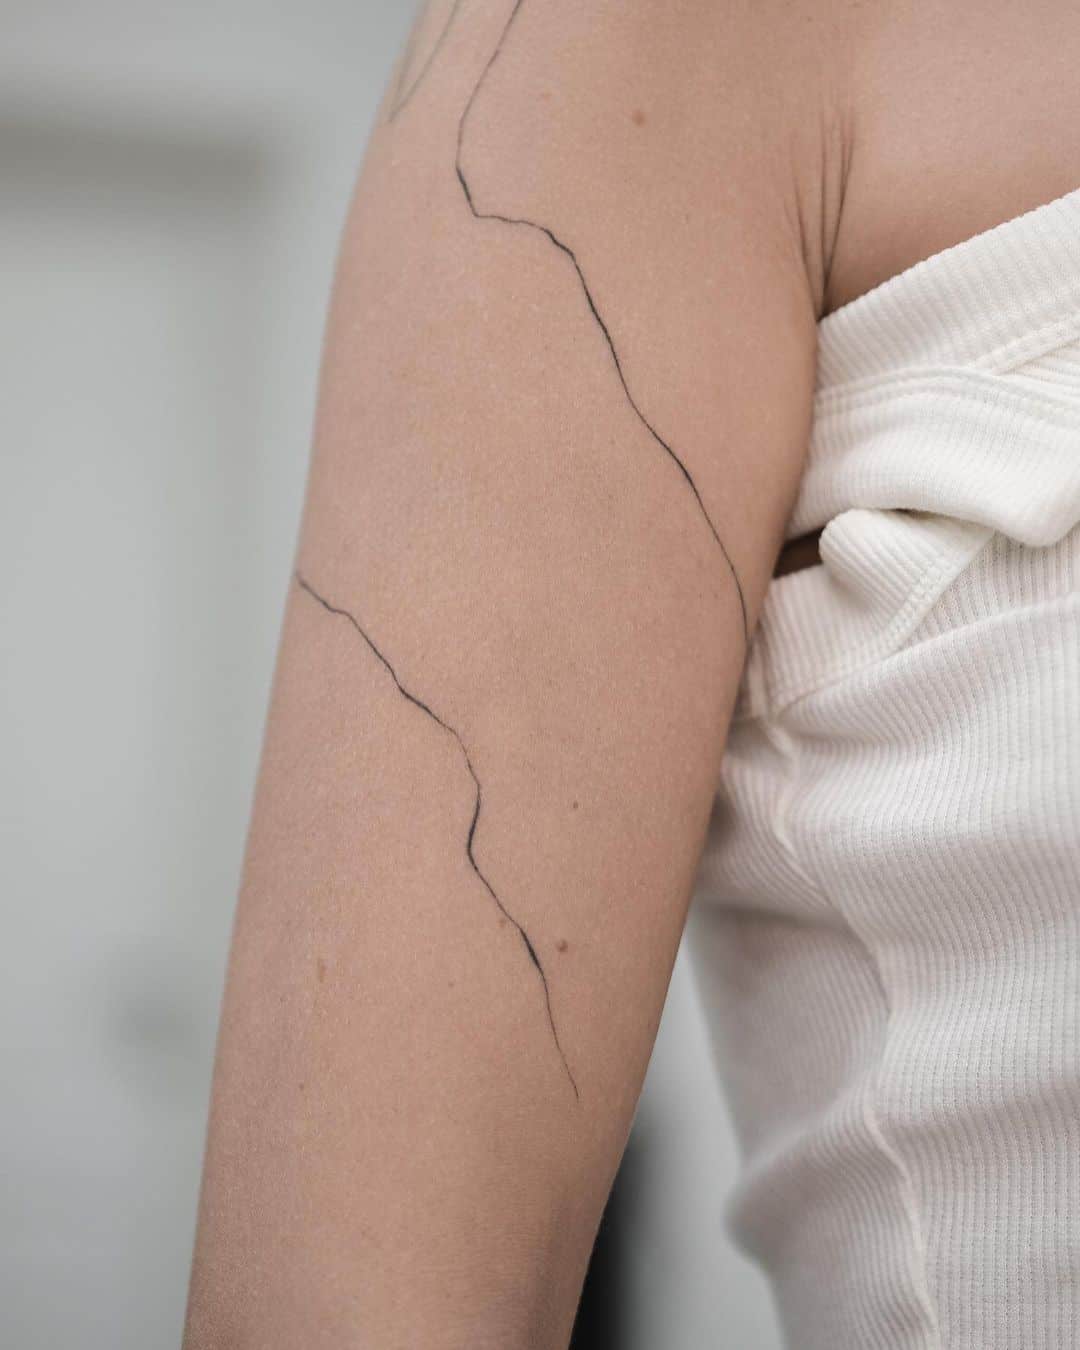 Simple abstract tattoo on arm by arinatattoo